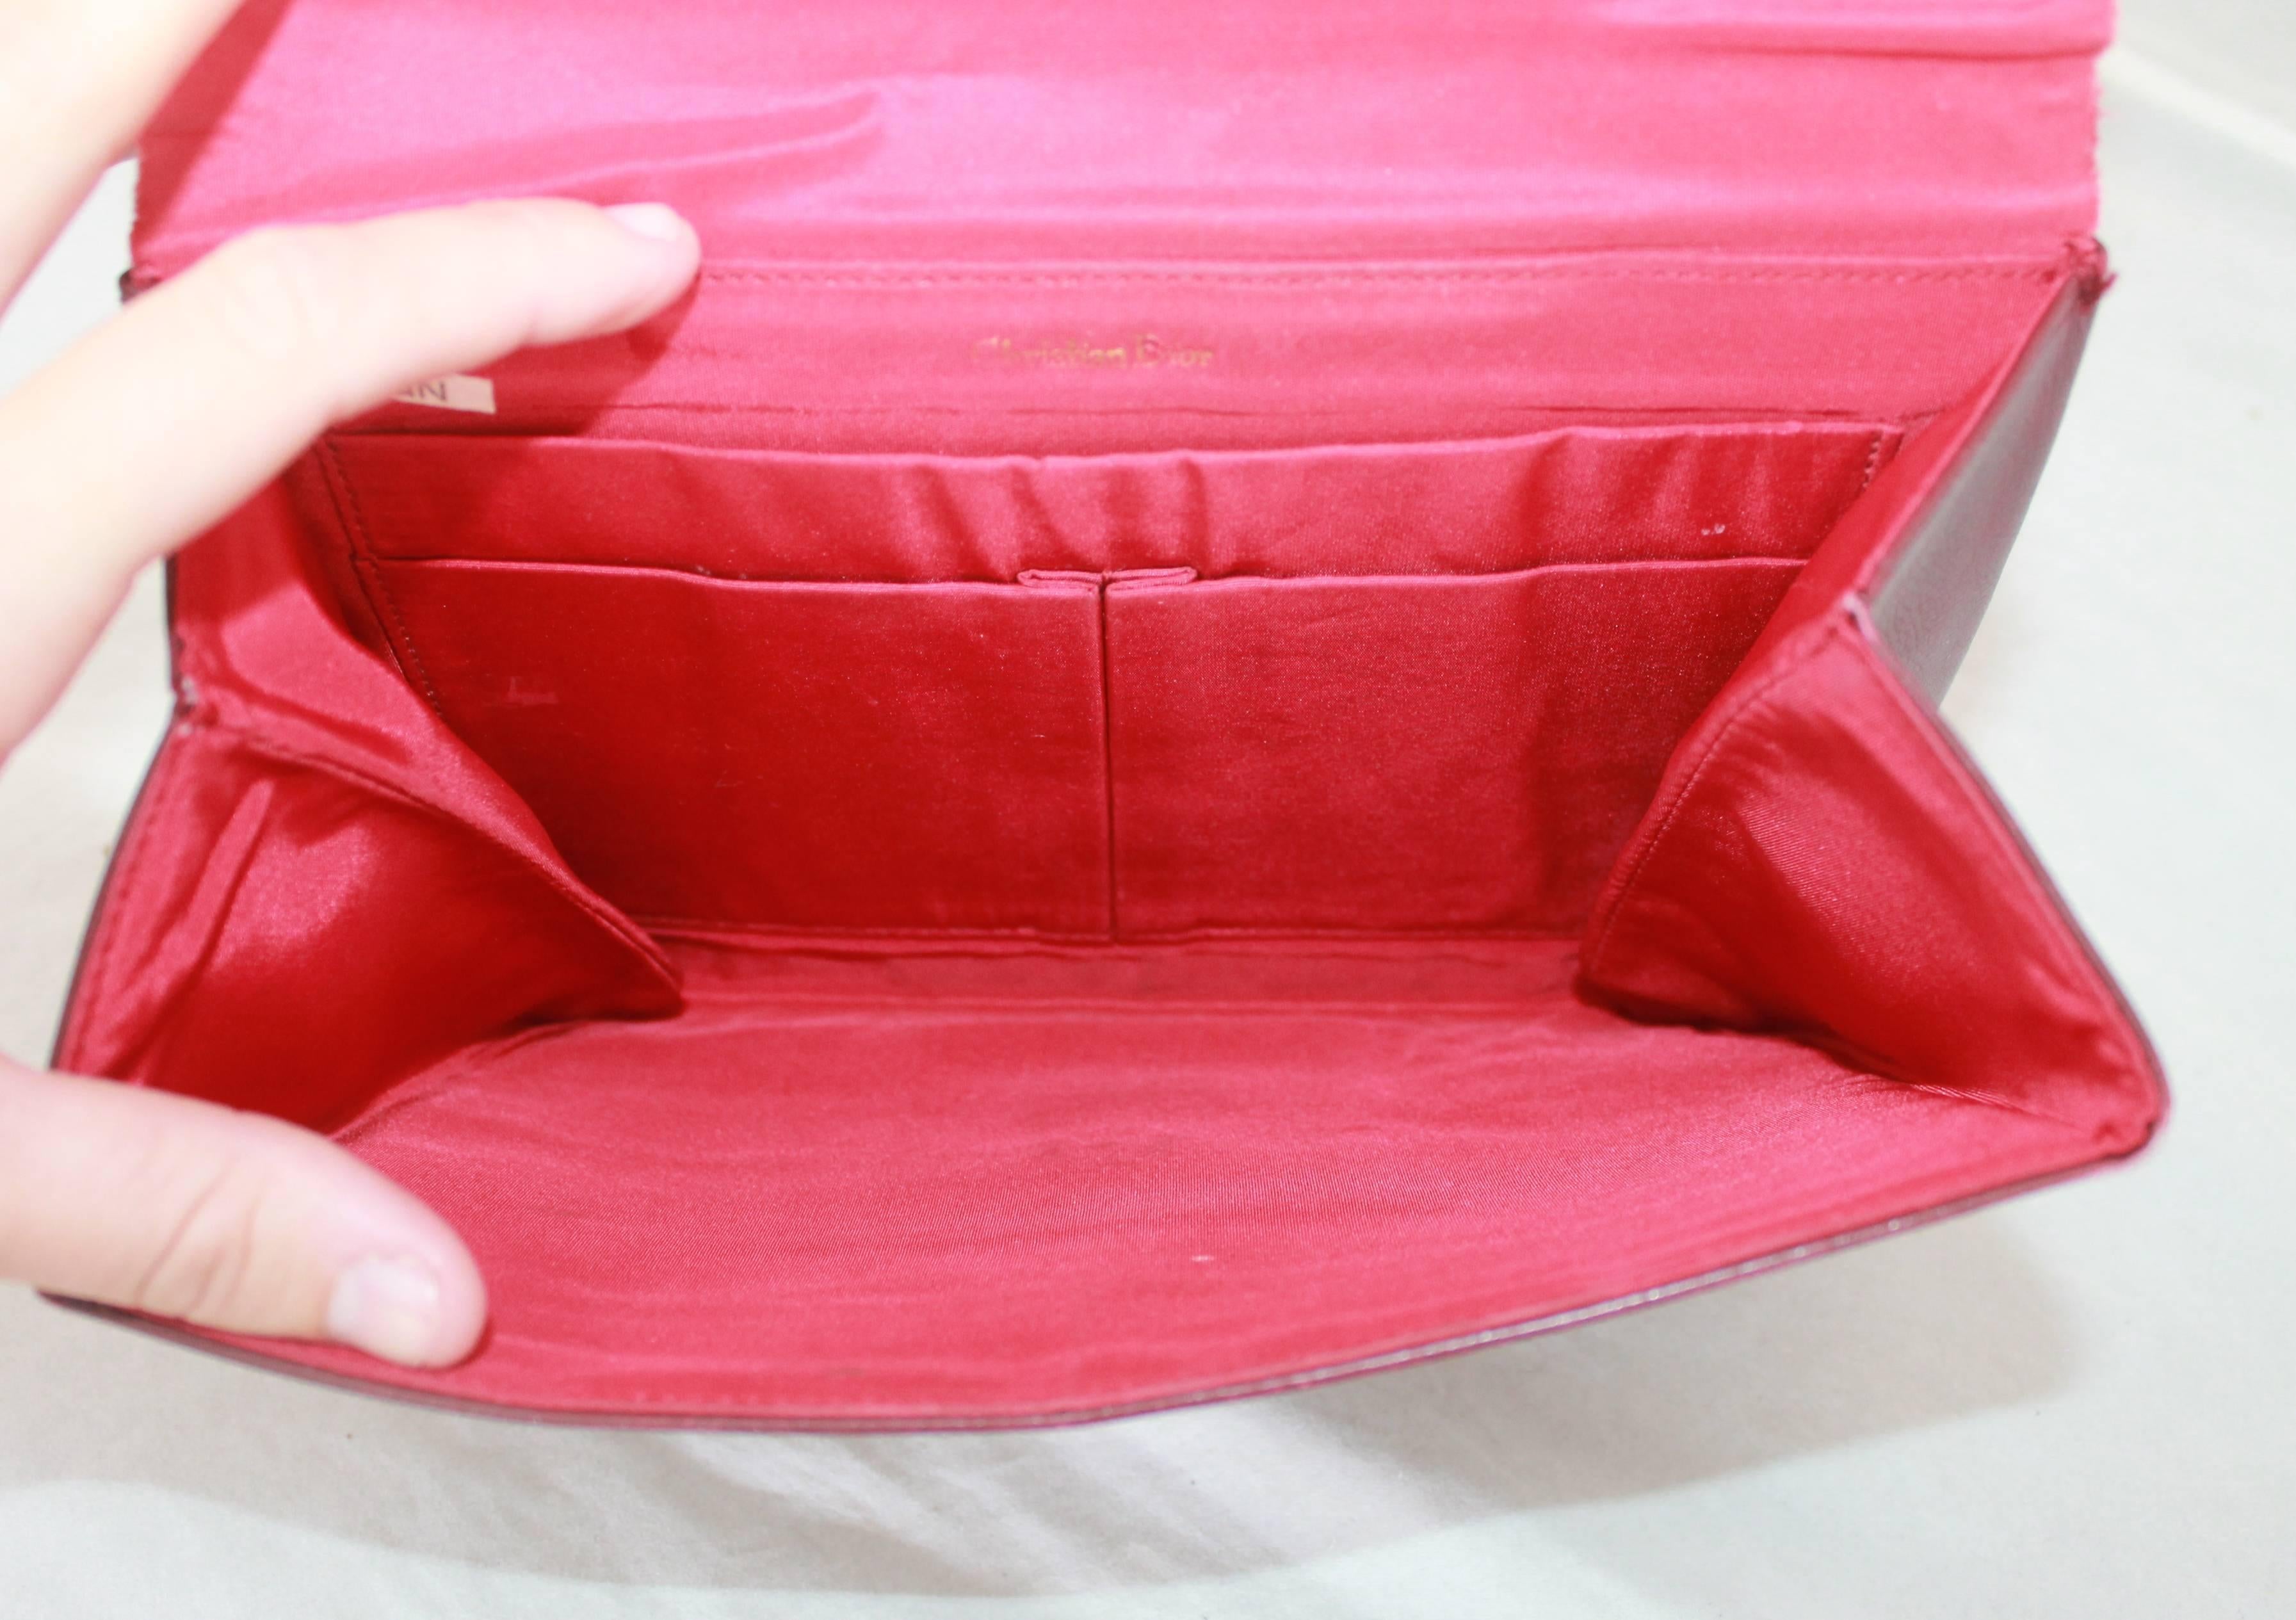 Christian Dior Vintage Burgundy Leather Clutch with Bow - circa 1990's In Good Condition For Sale In West Palm Beach, FL